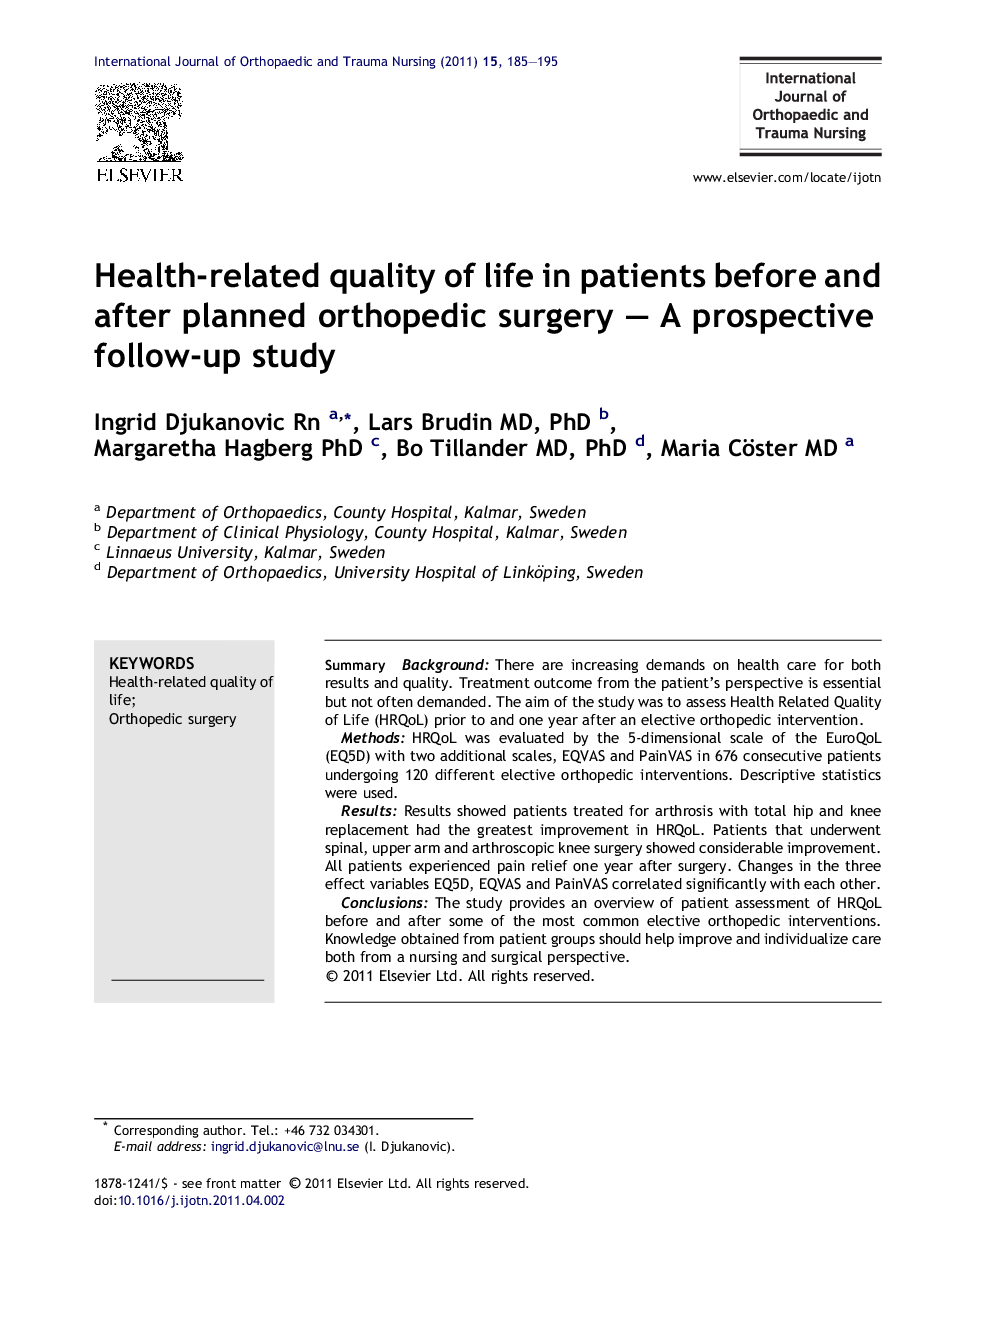 Health-related quality of life in patients before and after planned orthopedic surgery – A prospective follow-up study